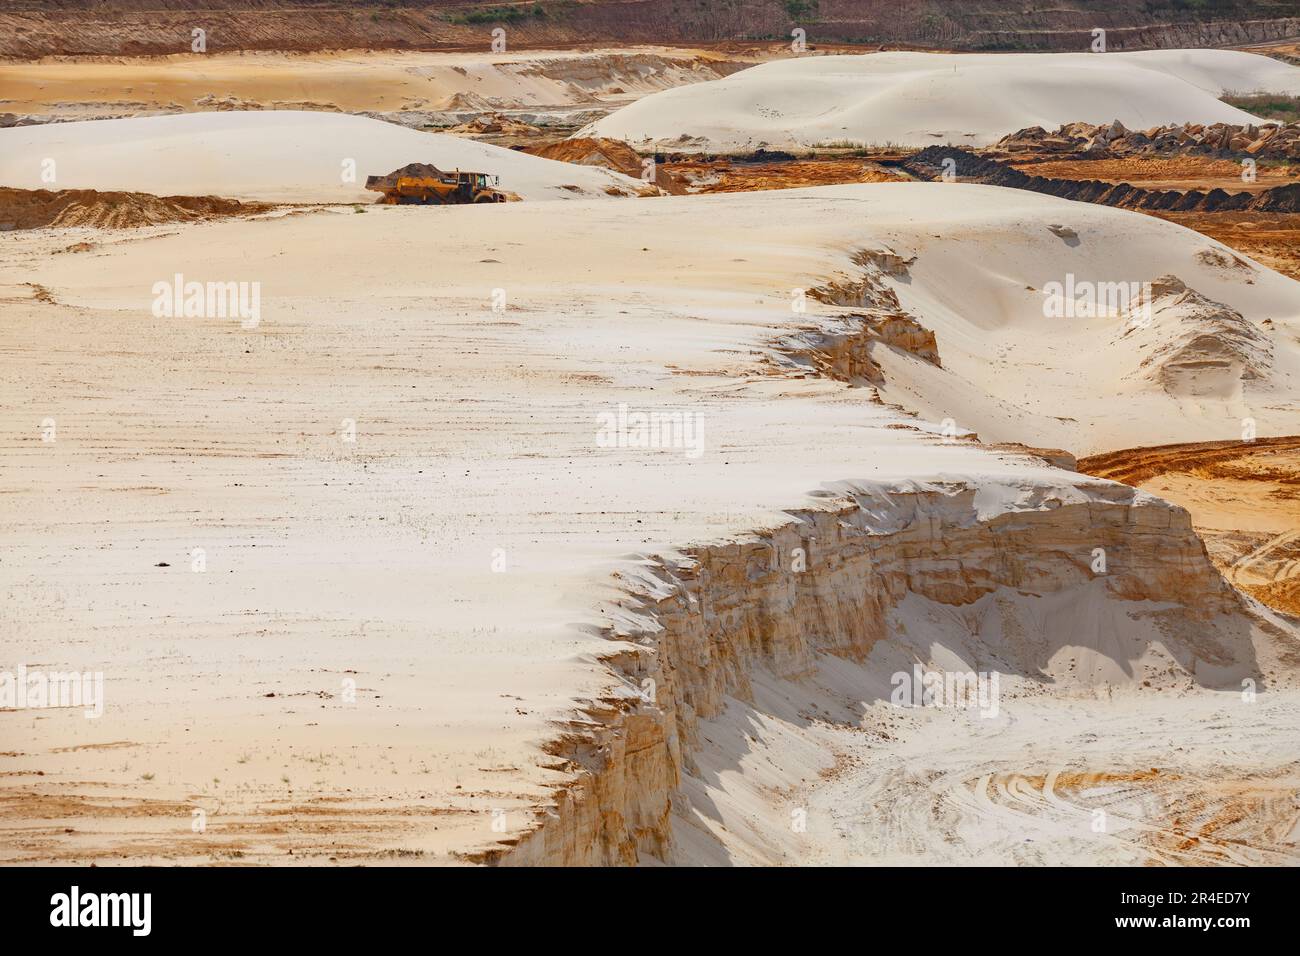 Chulkovo, Moscow province - July 20, 2021: Quarry truck Volvo move ground in sands. Open-pit sand extraction Stock Photo